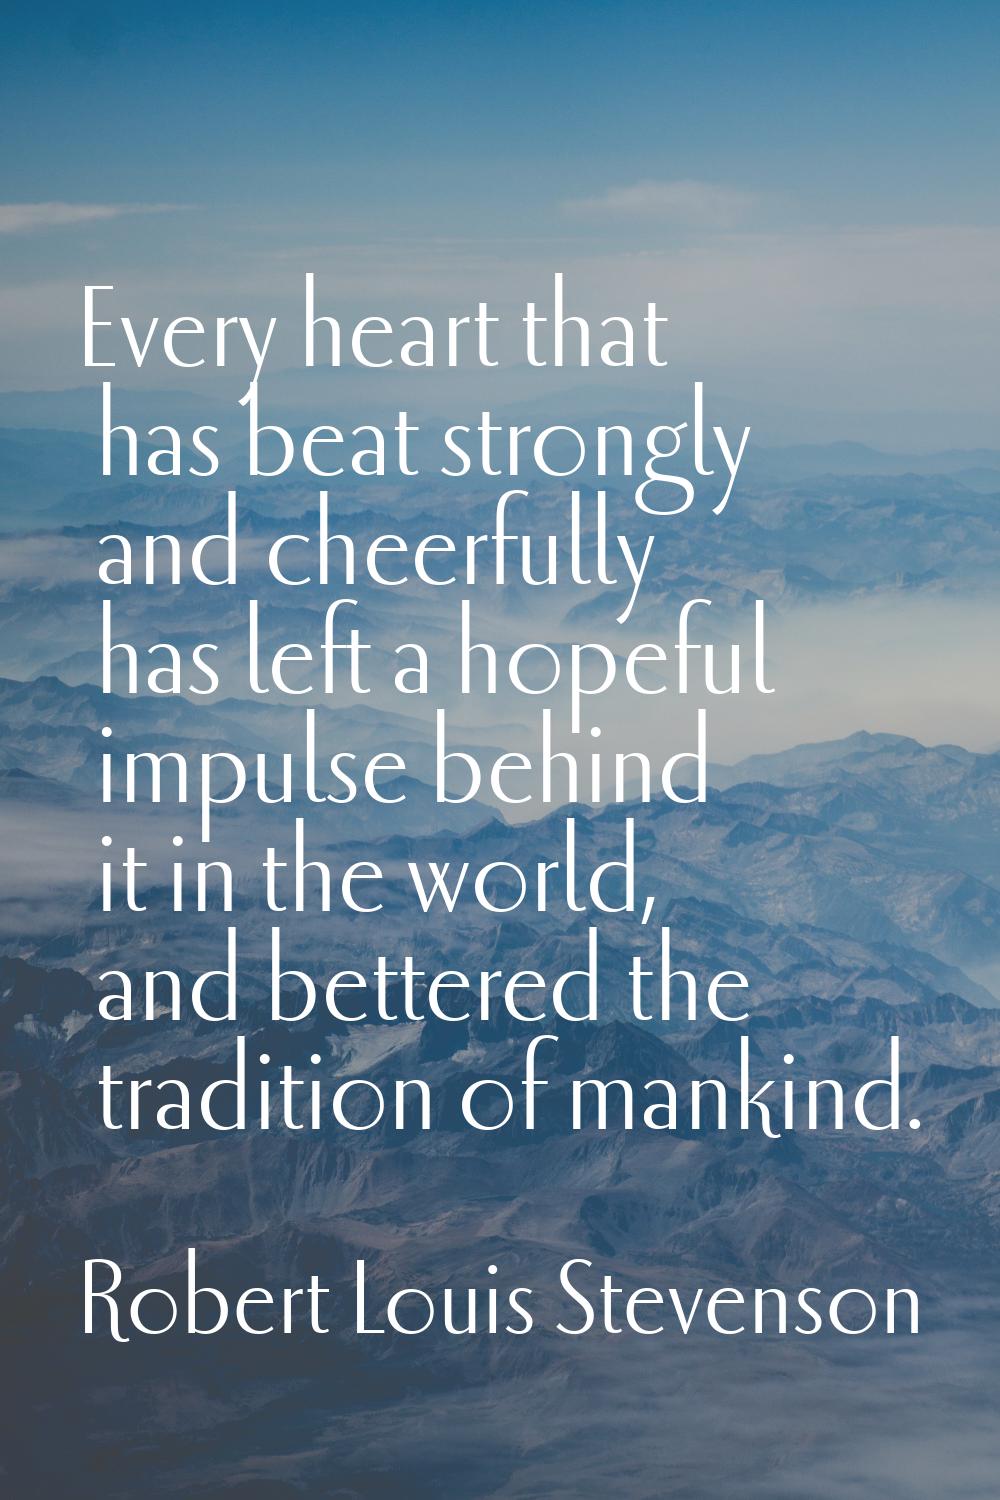 Every heart that has beat strongly and cheerfully has left a hopeful impulse behind it in the world